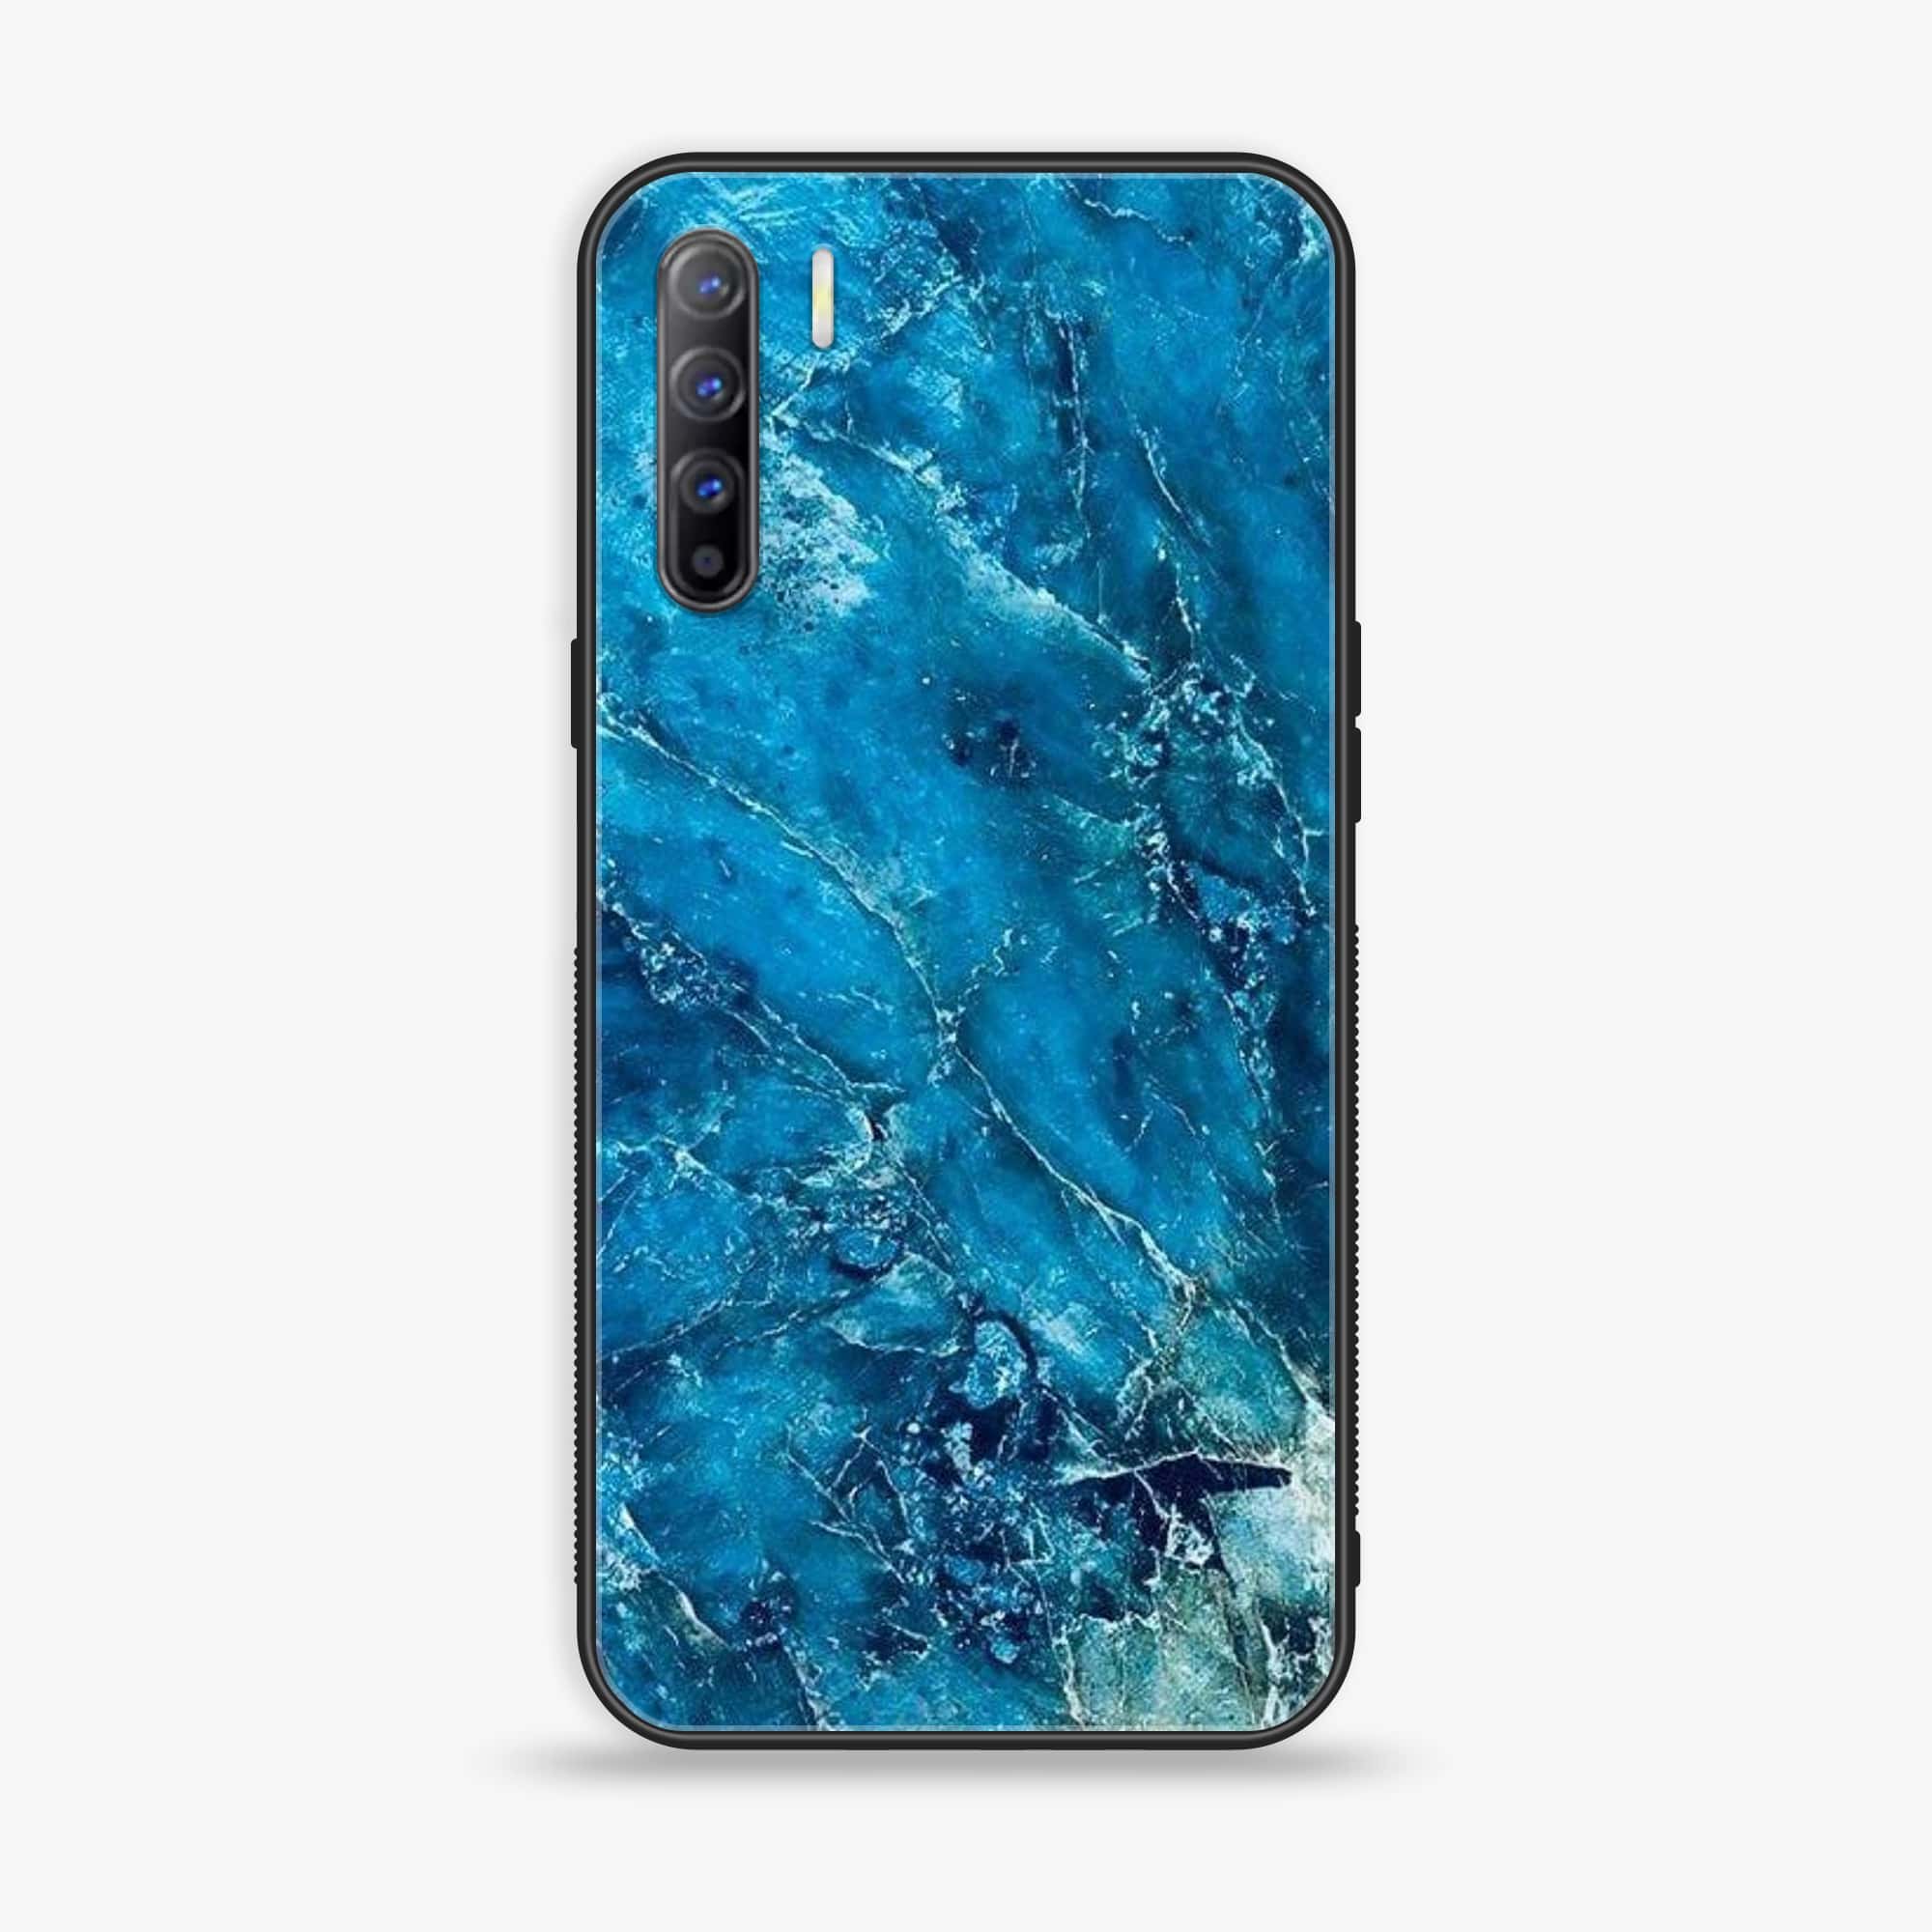 Oppo A91 - Blue Marble Series V 2.0 - Premium Printed Glass soft Bumper shock Proof Case